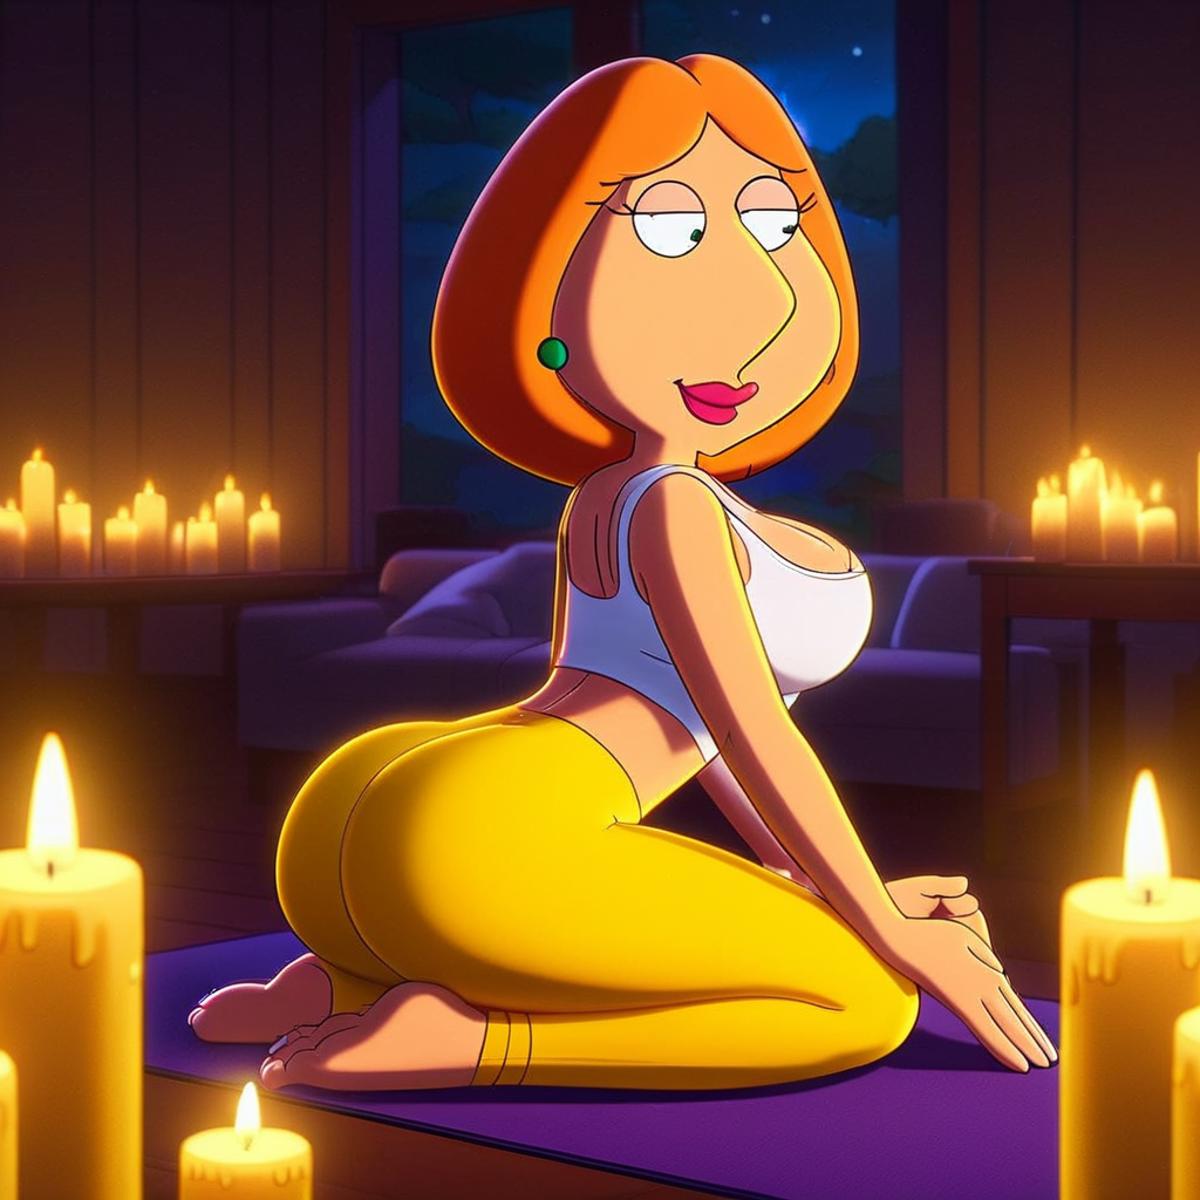 A cartoon character posing on a yoga mat with lit candles behind her.